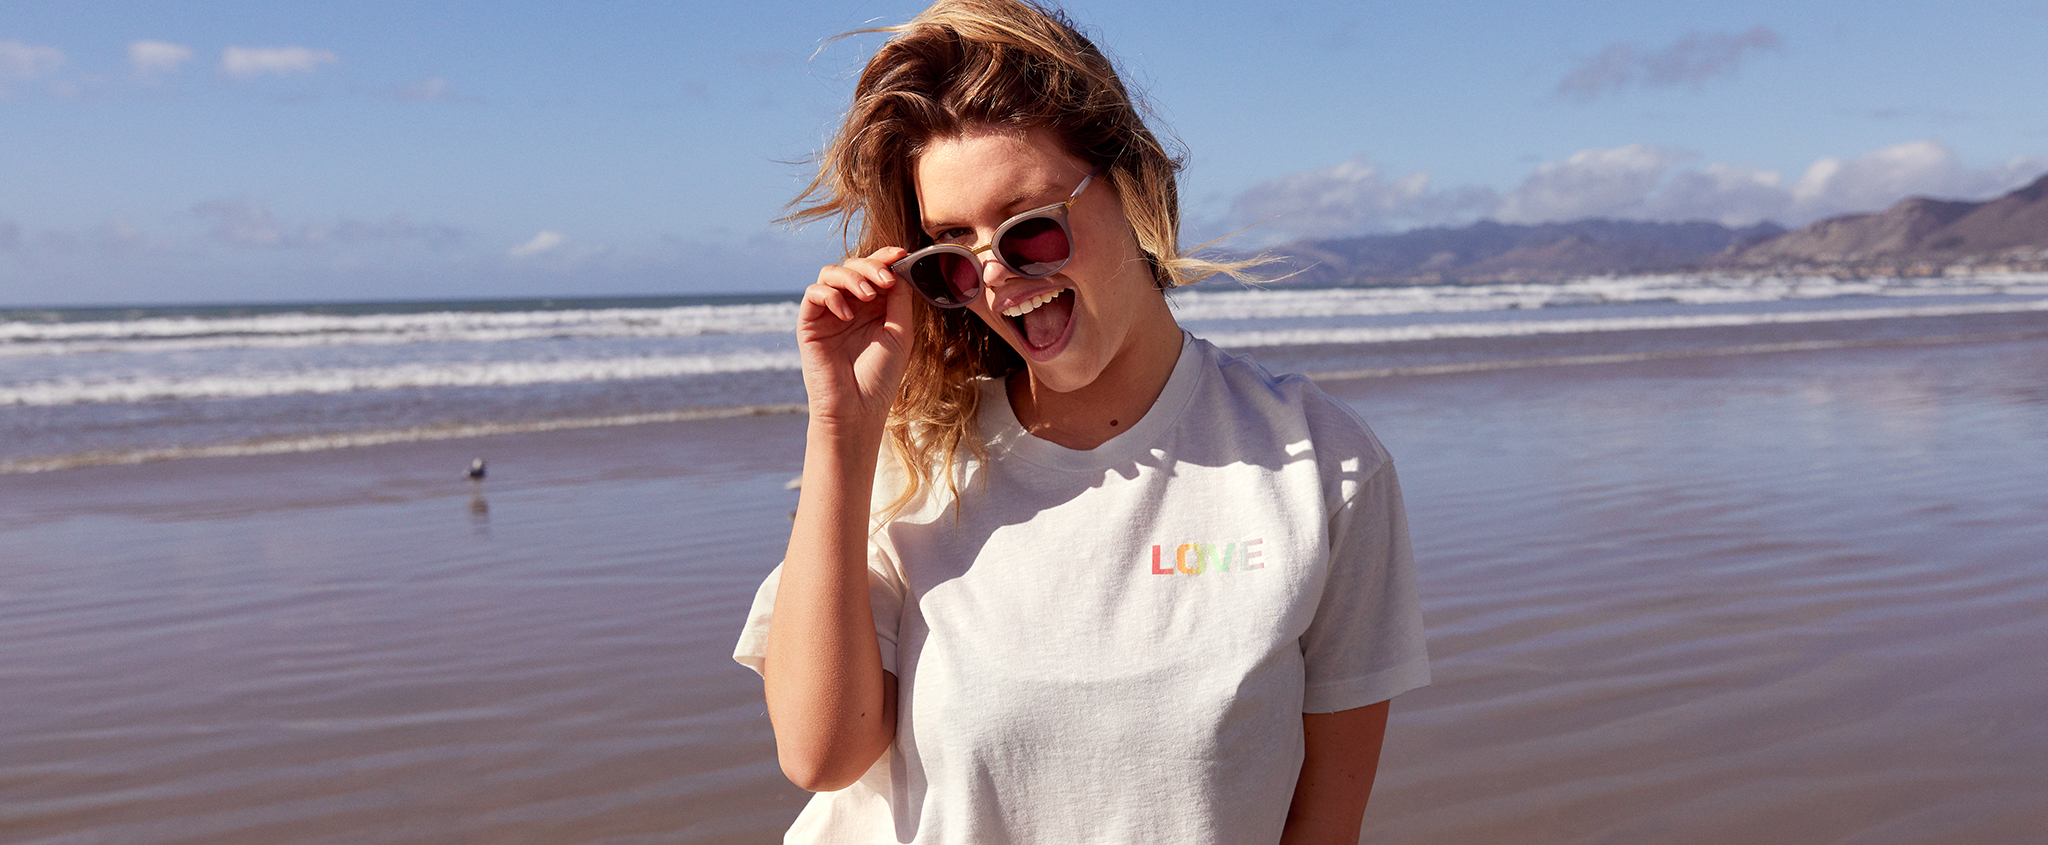 Meet the change-making brand creating adaptive apparel - #AerieREAL Life